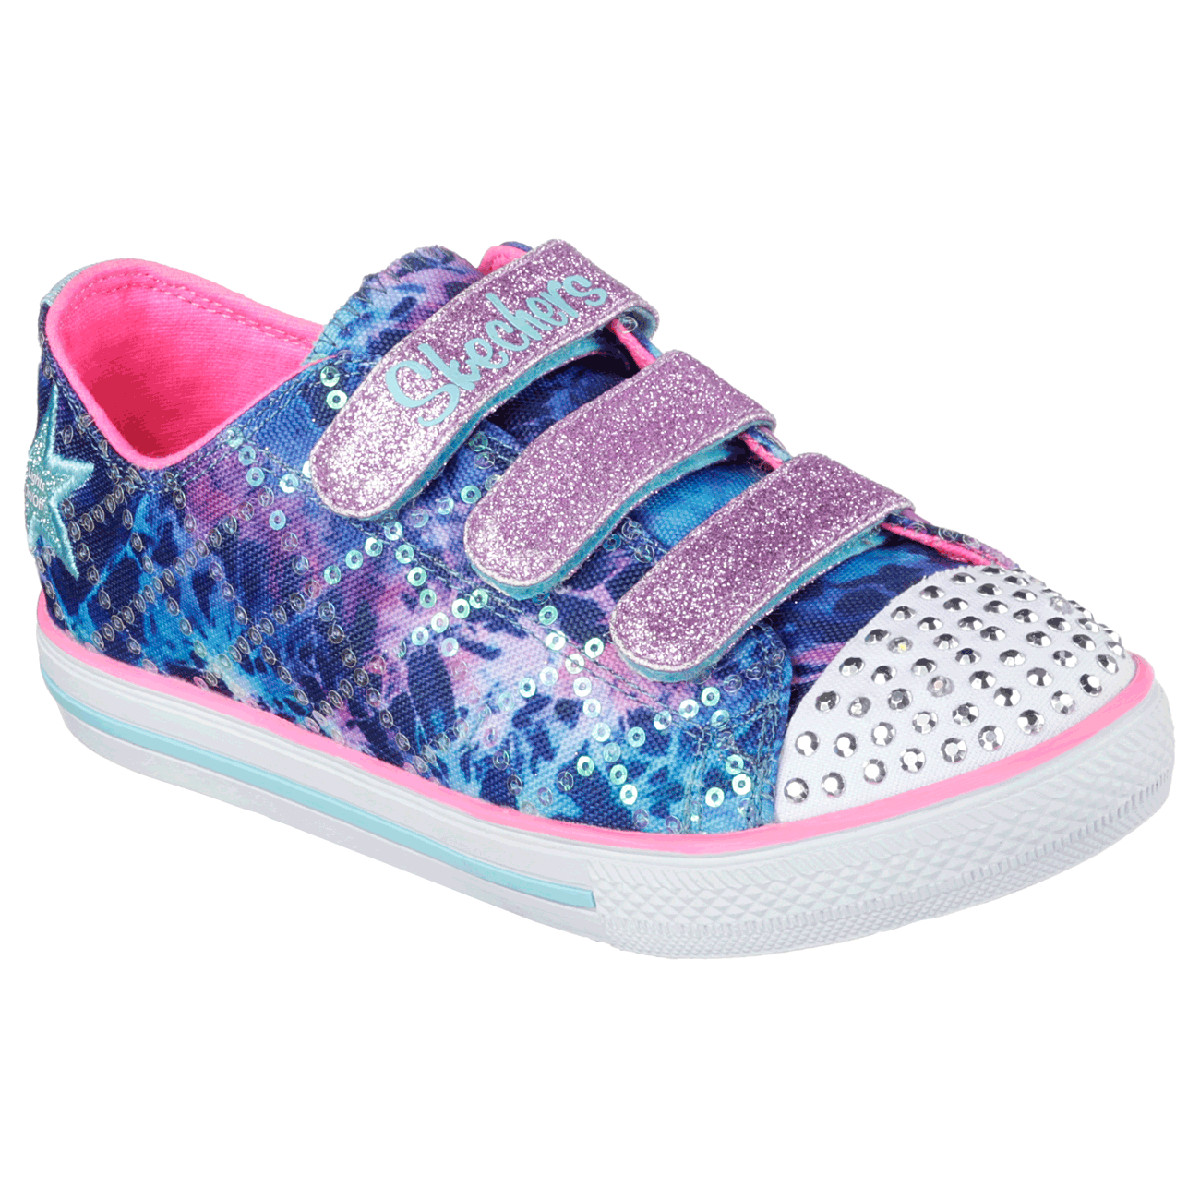 skechers childrens shoes twinkle toes australia